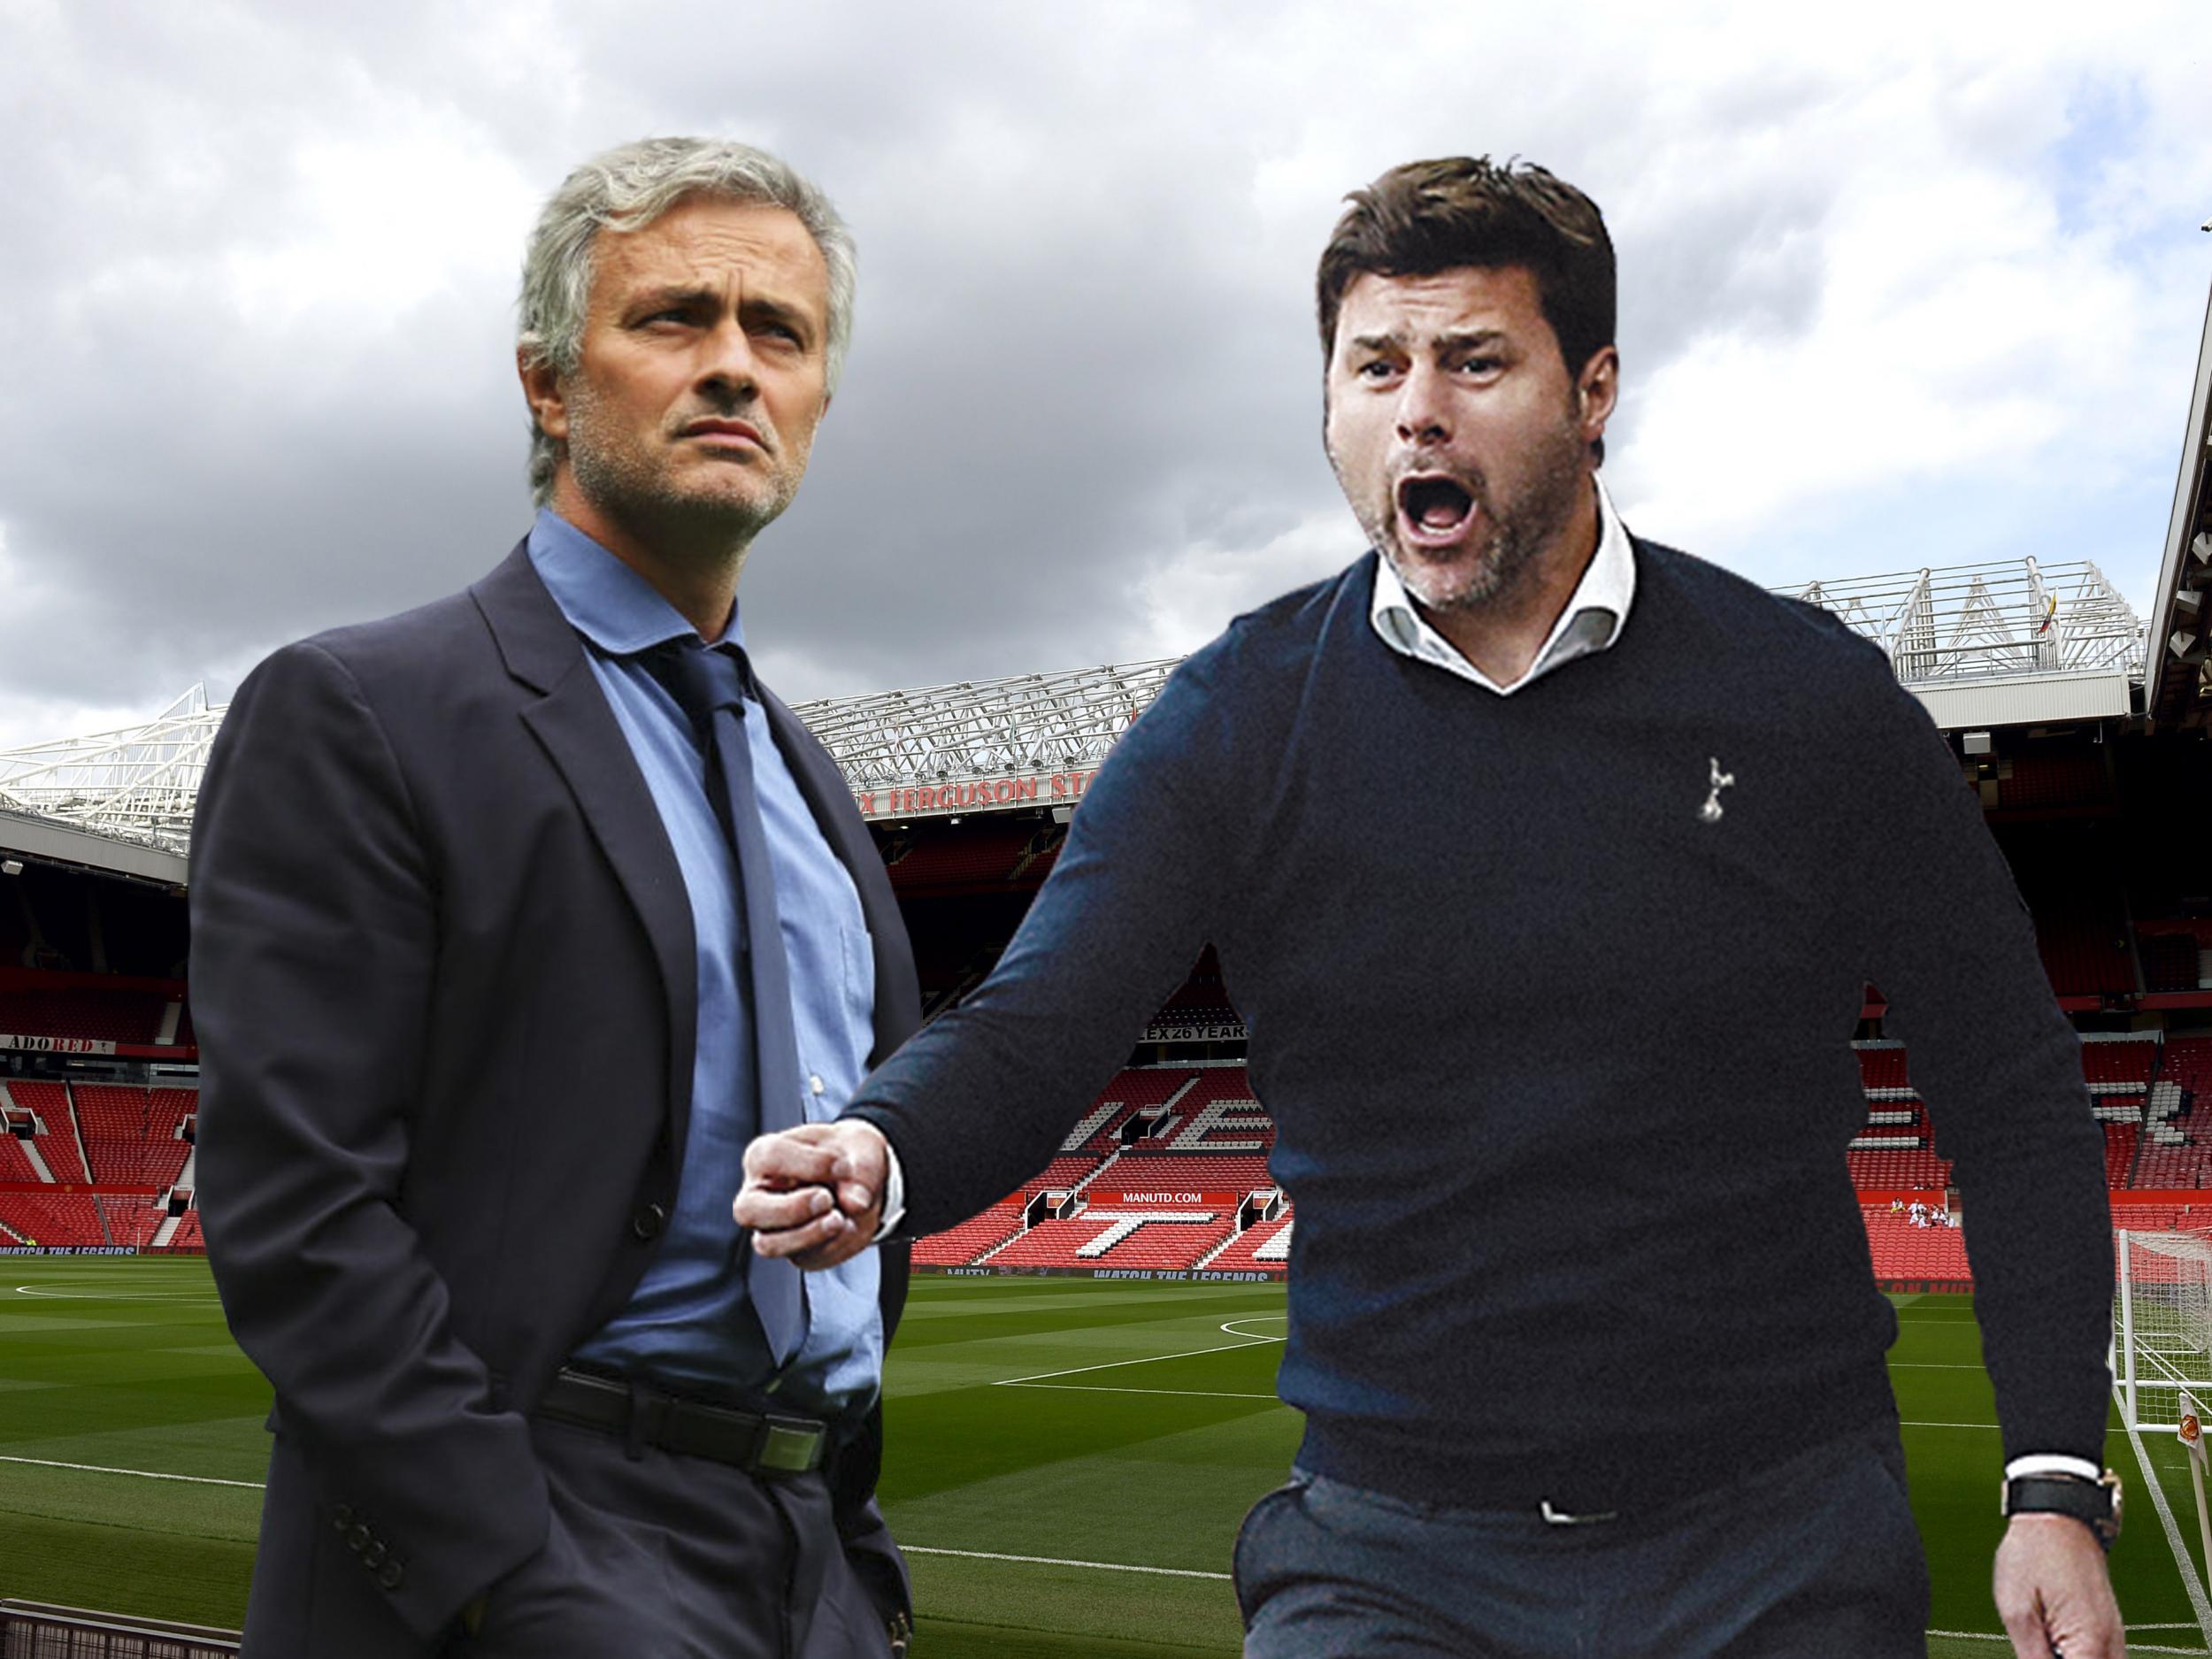 Can Mourinho prove he is still the master against the young pretender?